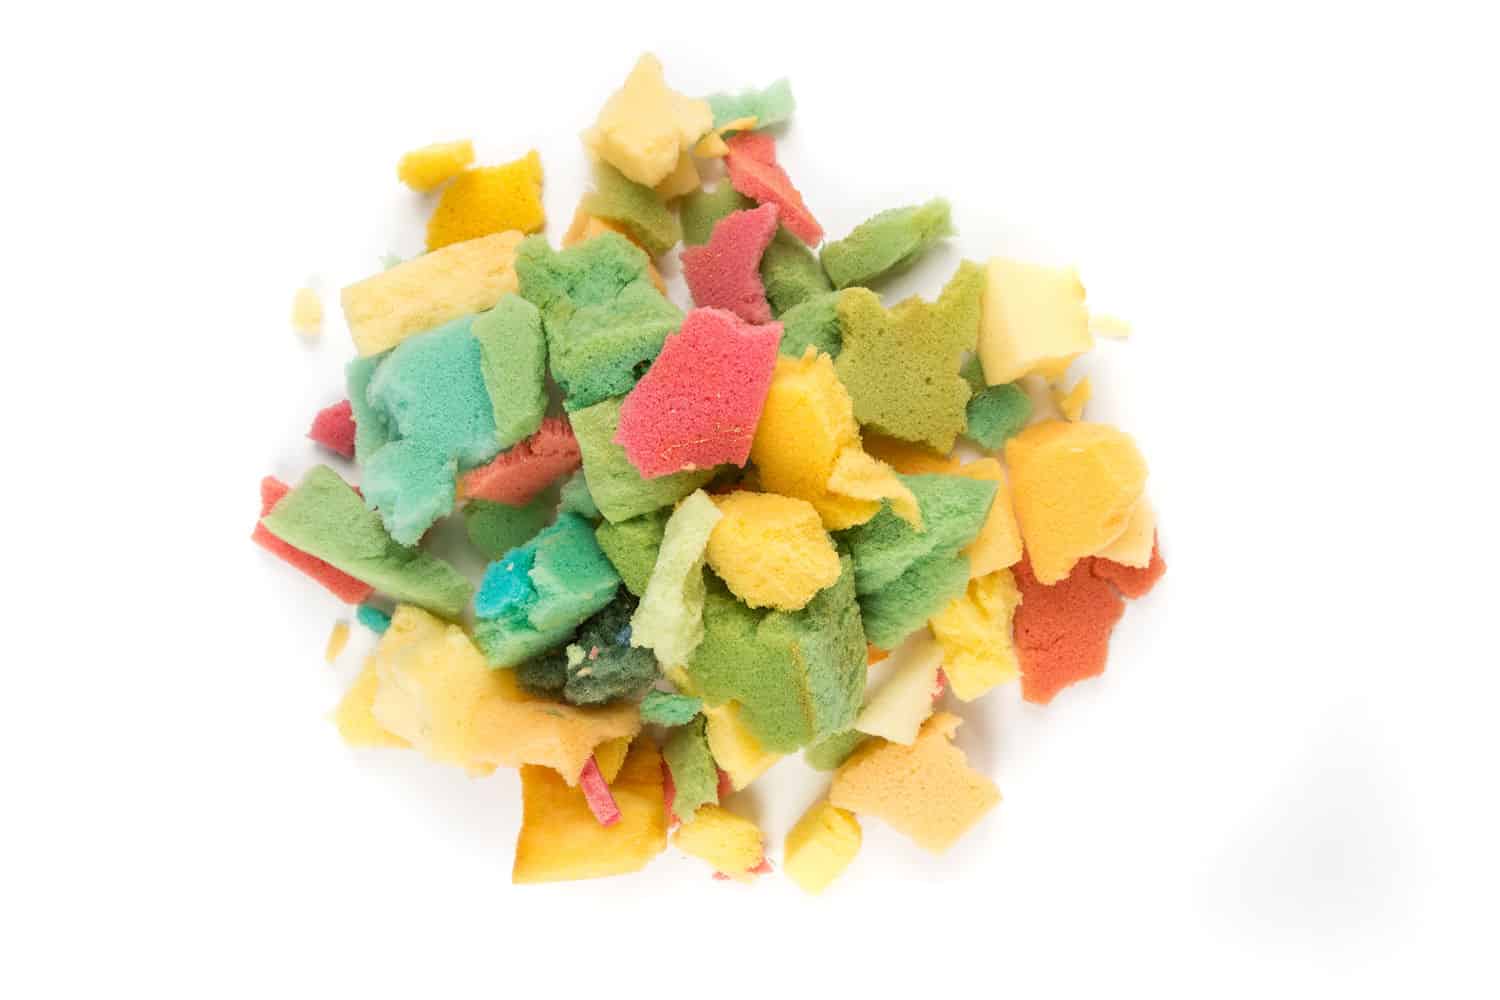 Various small foam scraps in a pile on a white background